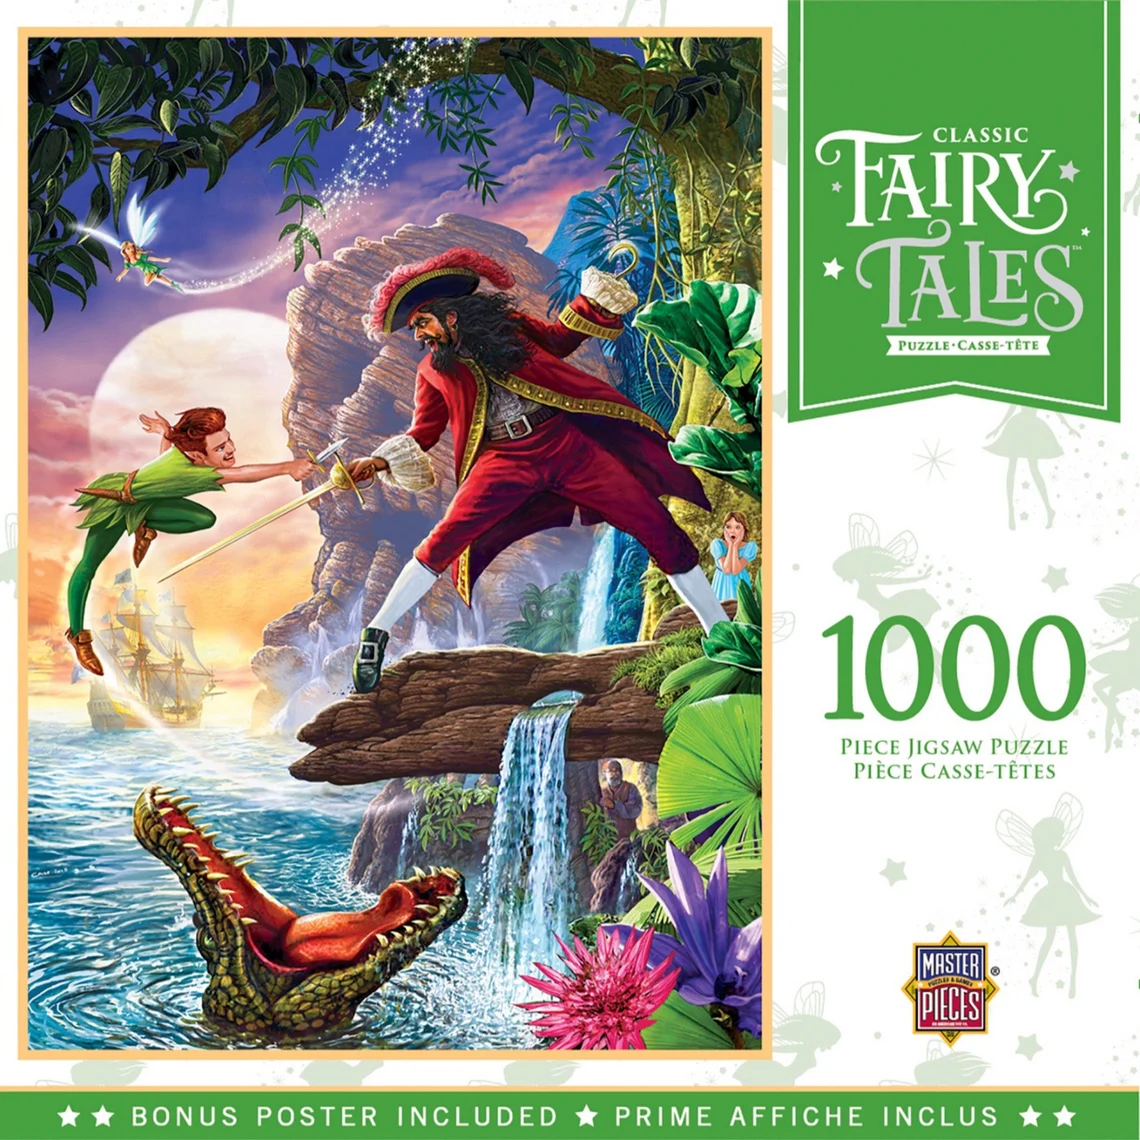 puzzle based on kid's book Peter Pan features Peter sword fighting Hook with the crocodile waiting below